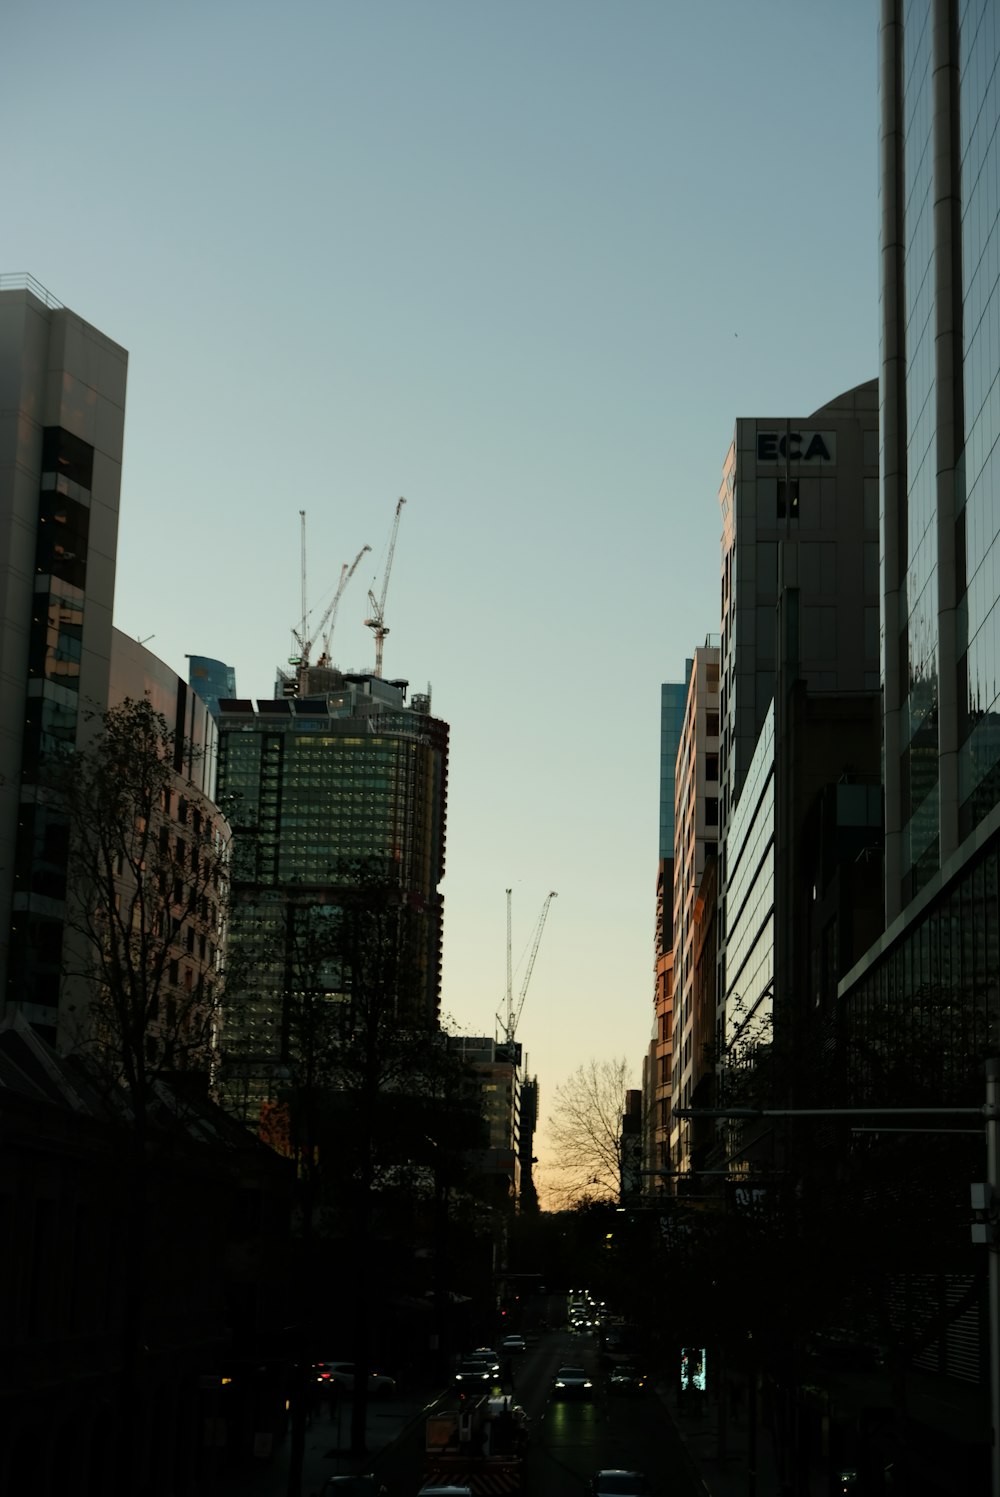 a city street filled with lots of tall buildings